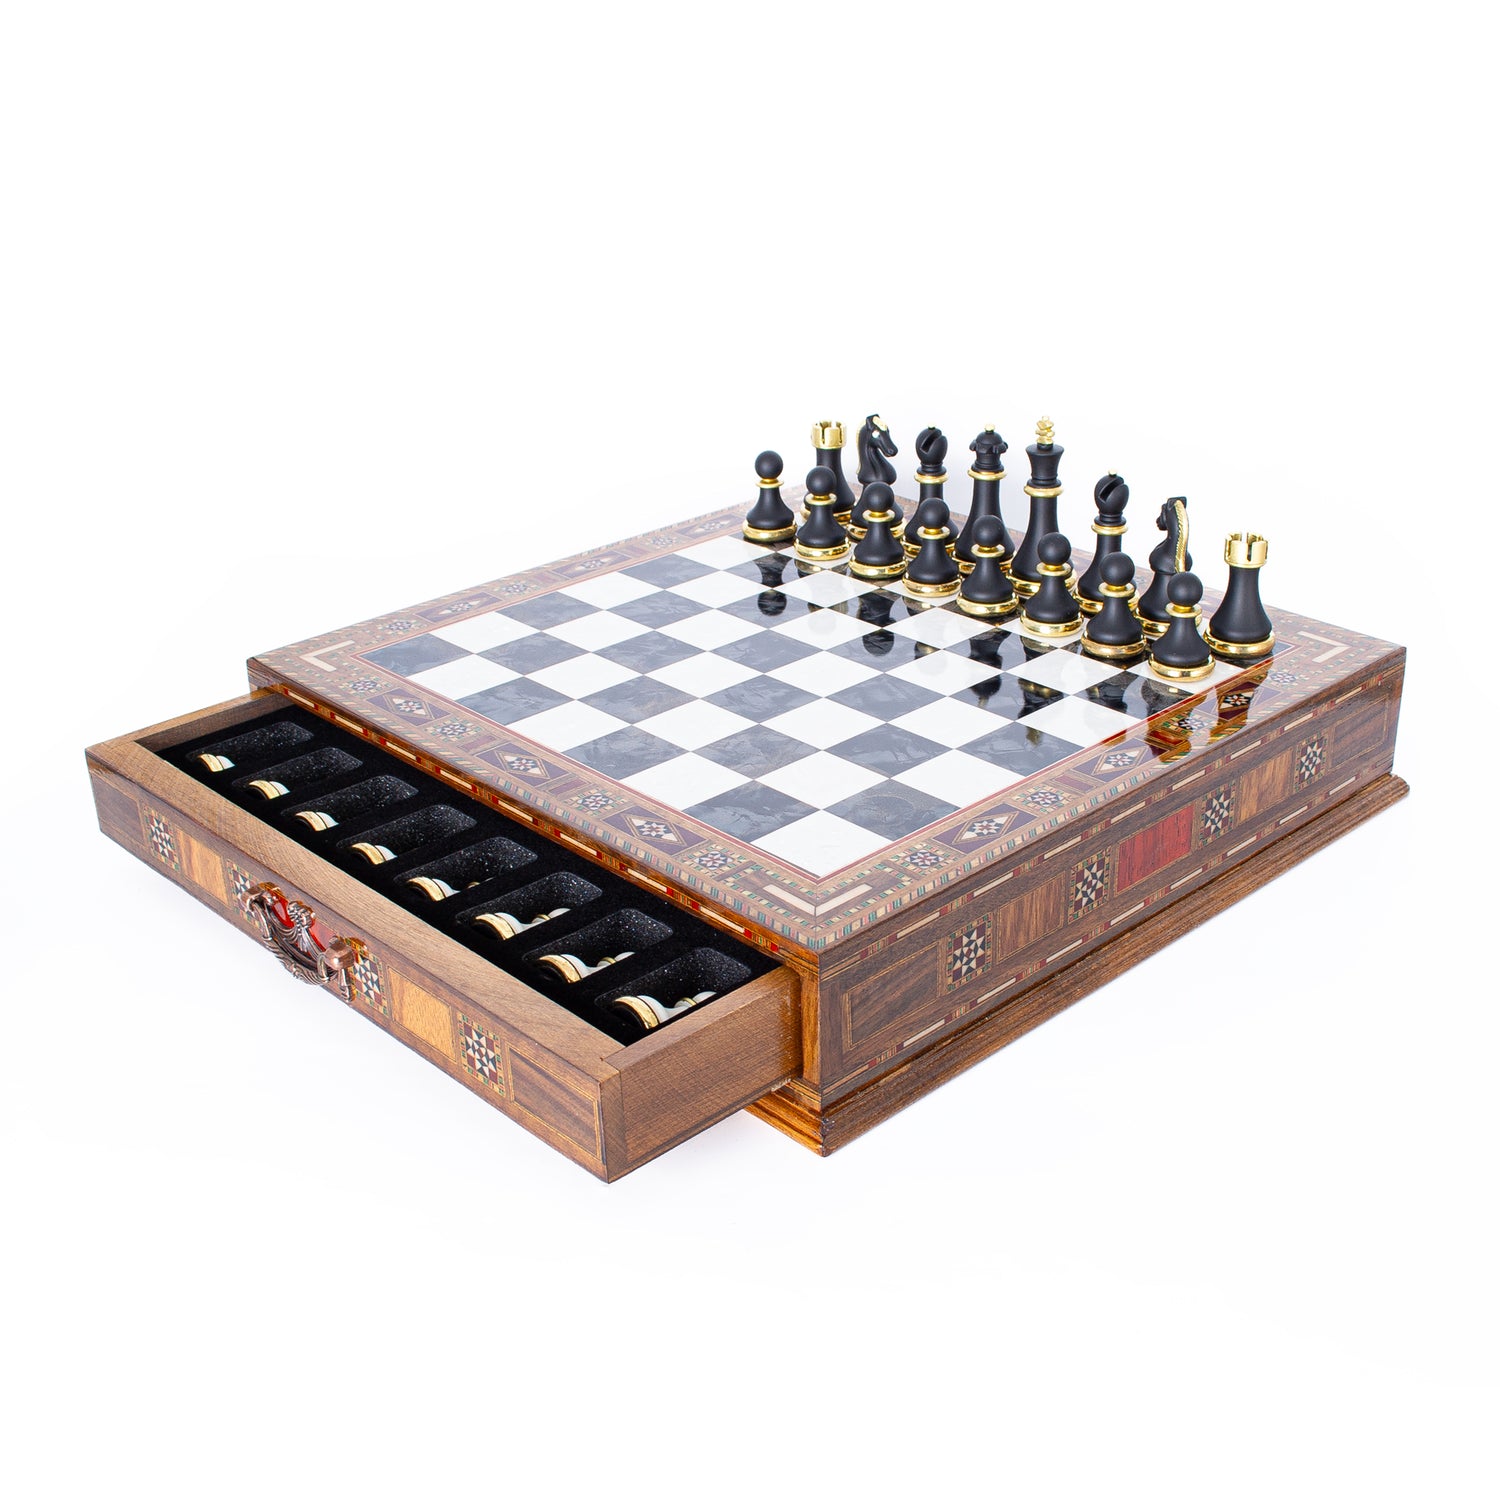 Unique Wooden Chess Set: Black & Silver with Drawer - Ketohandcraft